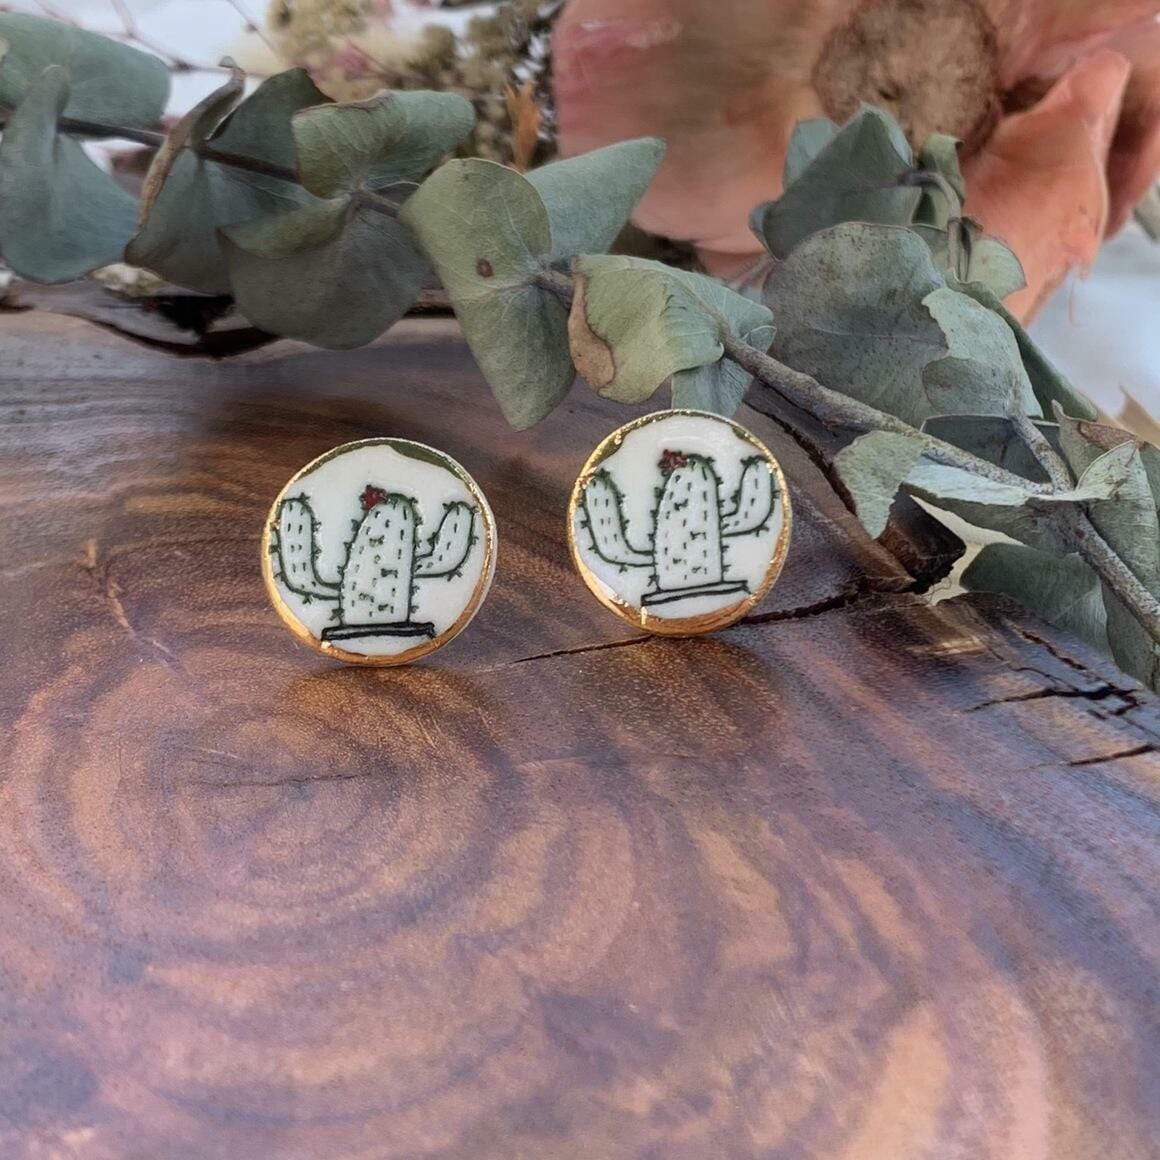 WOLF & CLAY Earrings Cactus 1 Cactus and Succulent Porcelain Stud Earrings